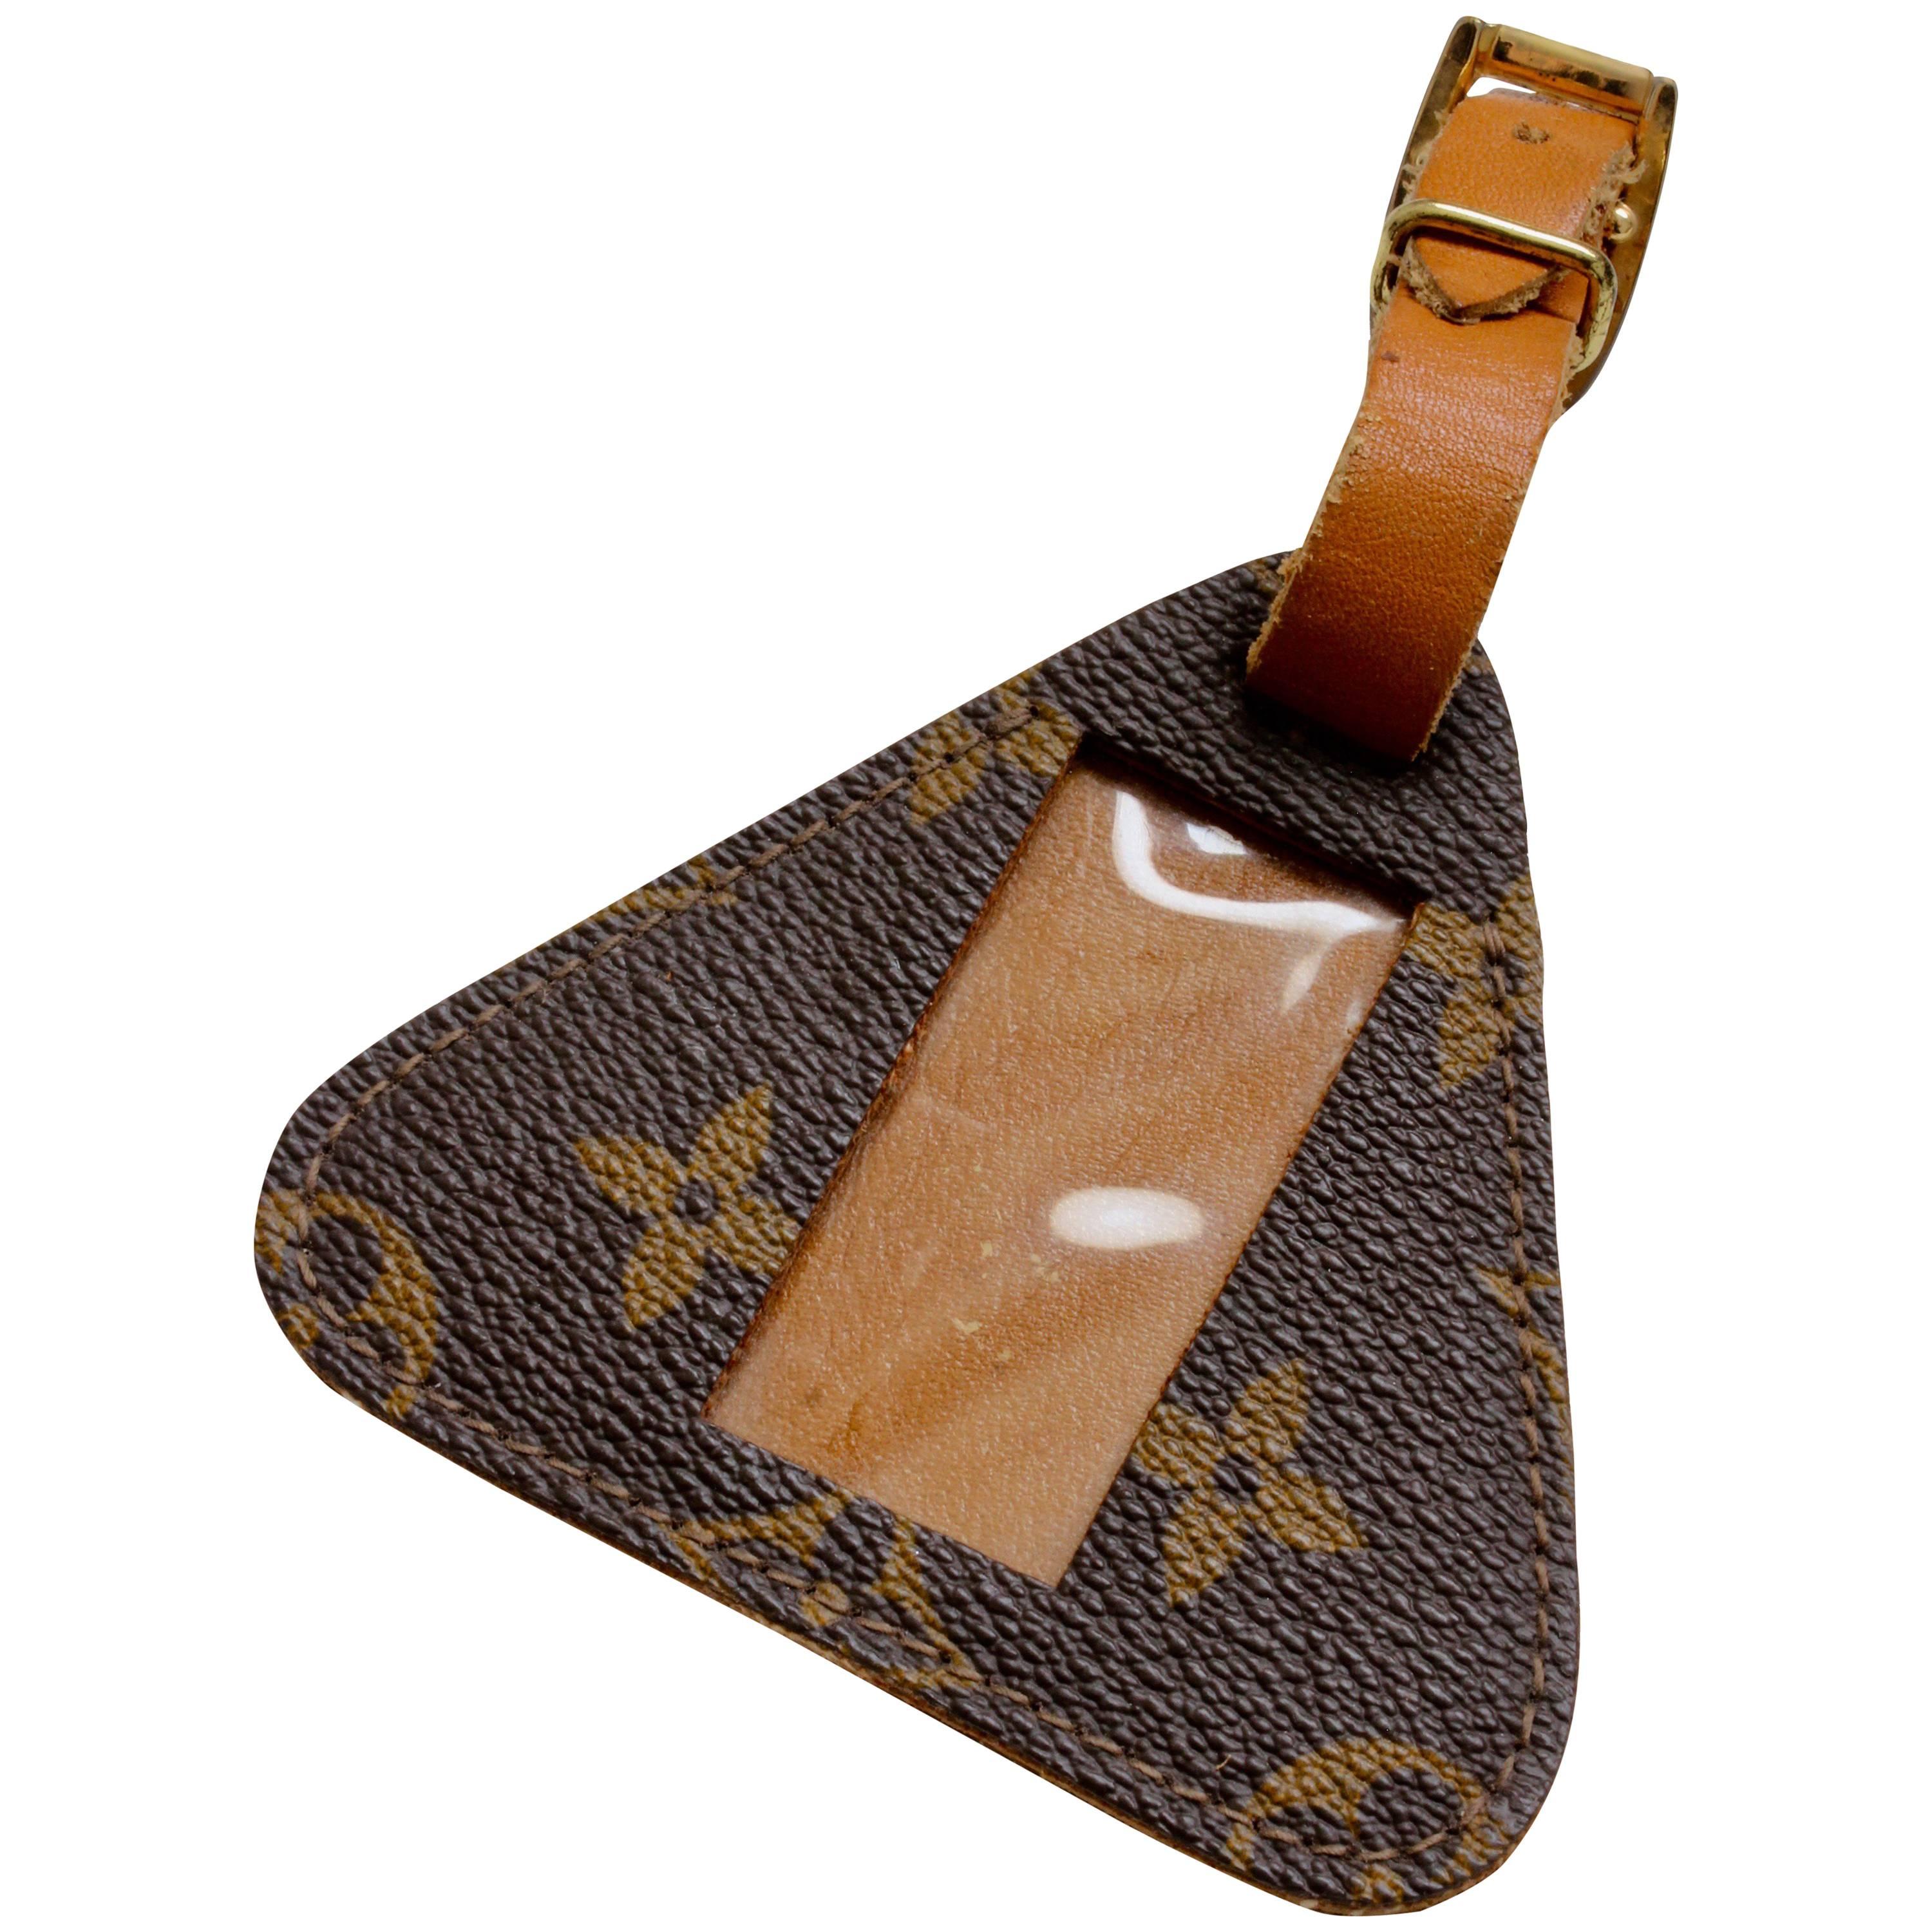 Louis Vuitton Monogram Luggage Tag I.D. Holder Travel Accessory French Company 